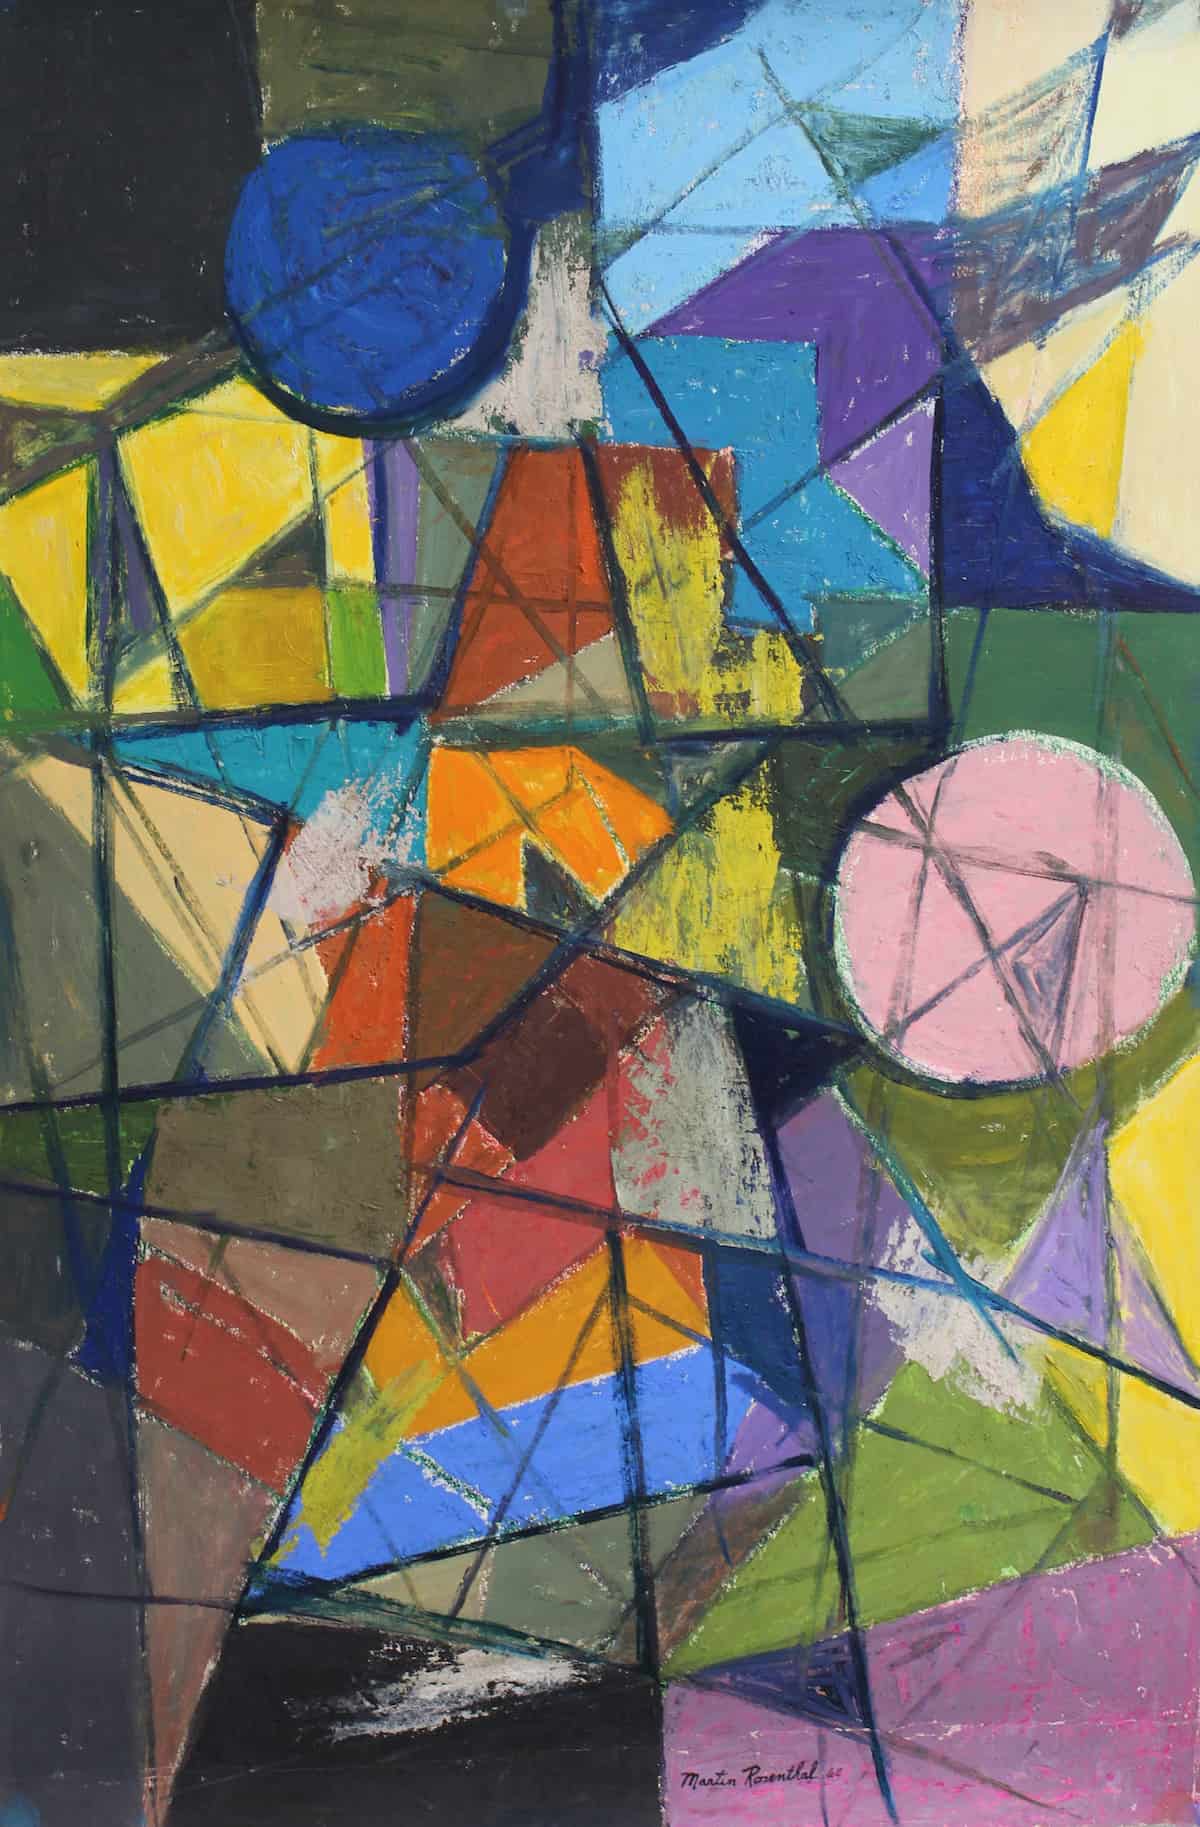 Geometric Abstract #2 | Martin Rosenthal | Oil On Canvas | 26x39